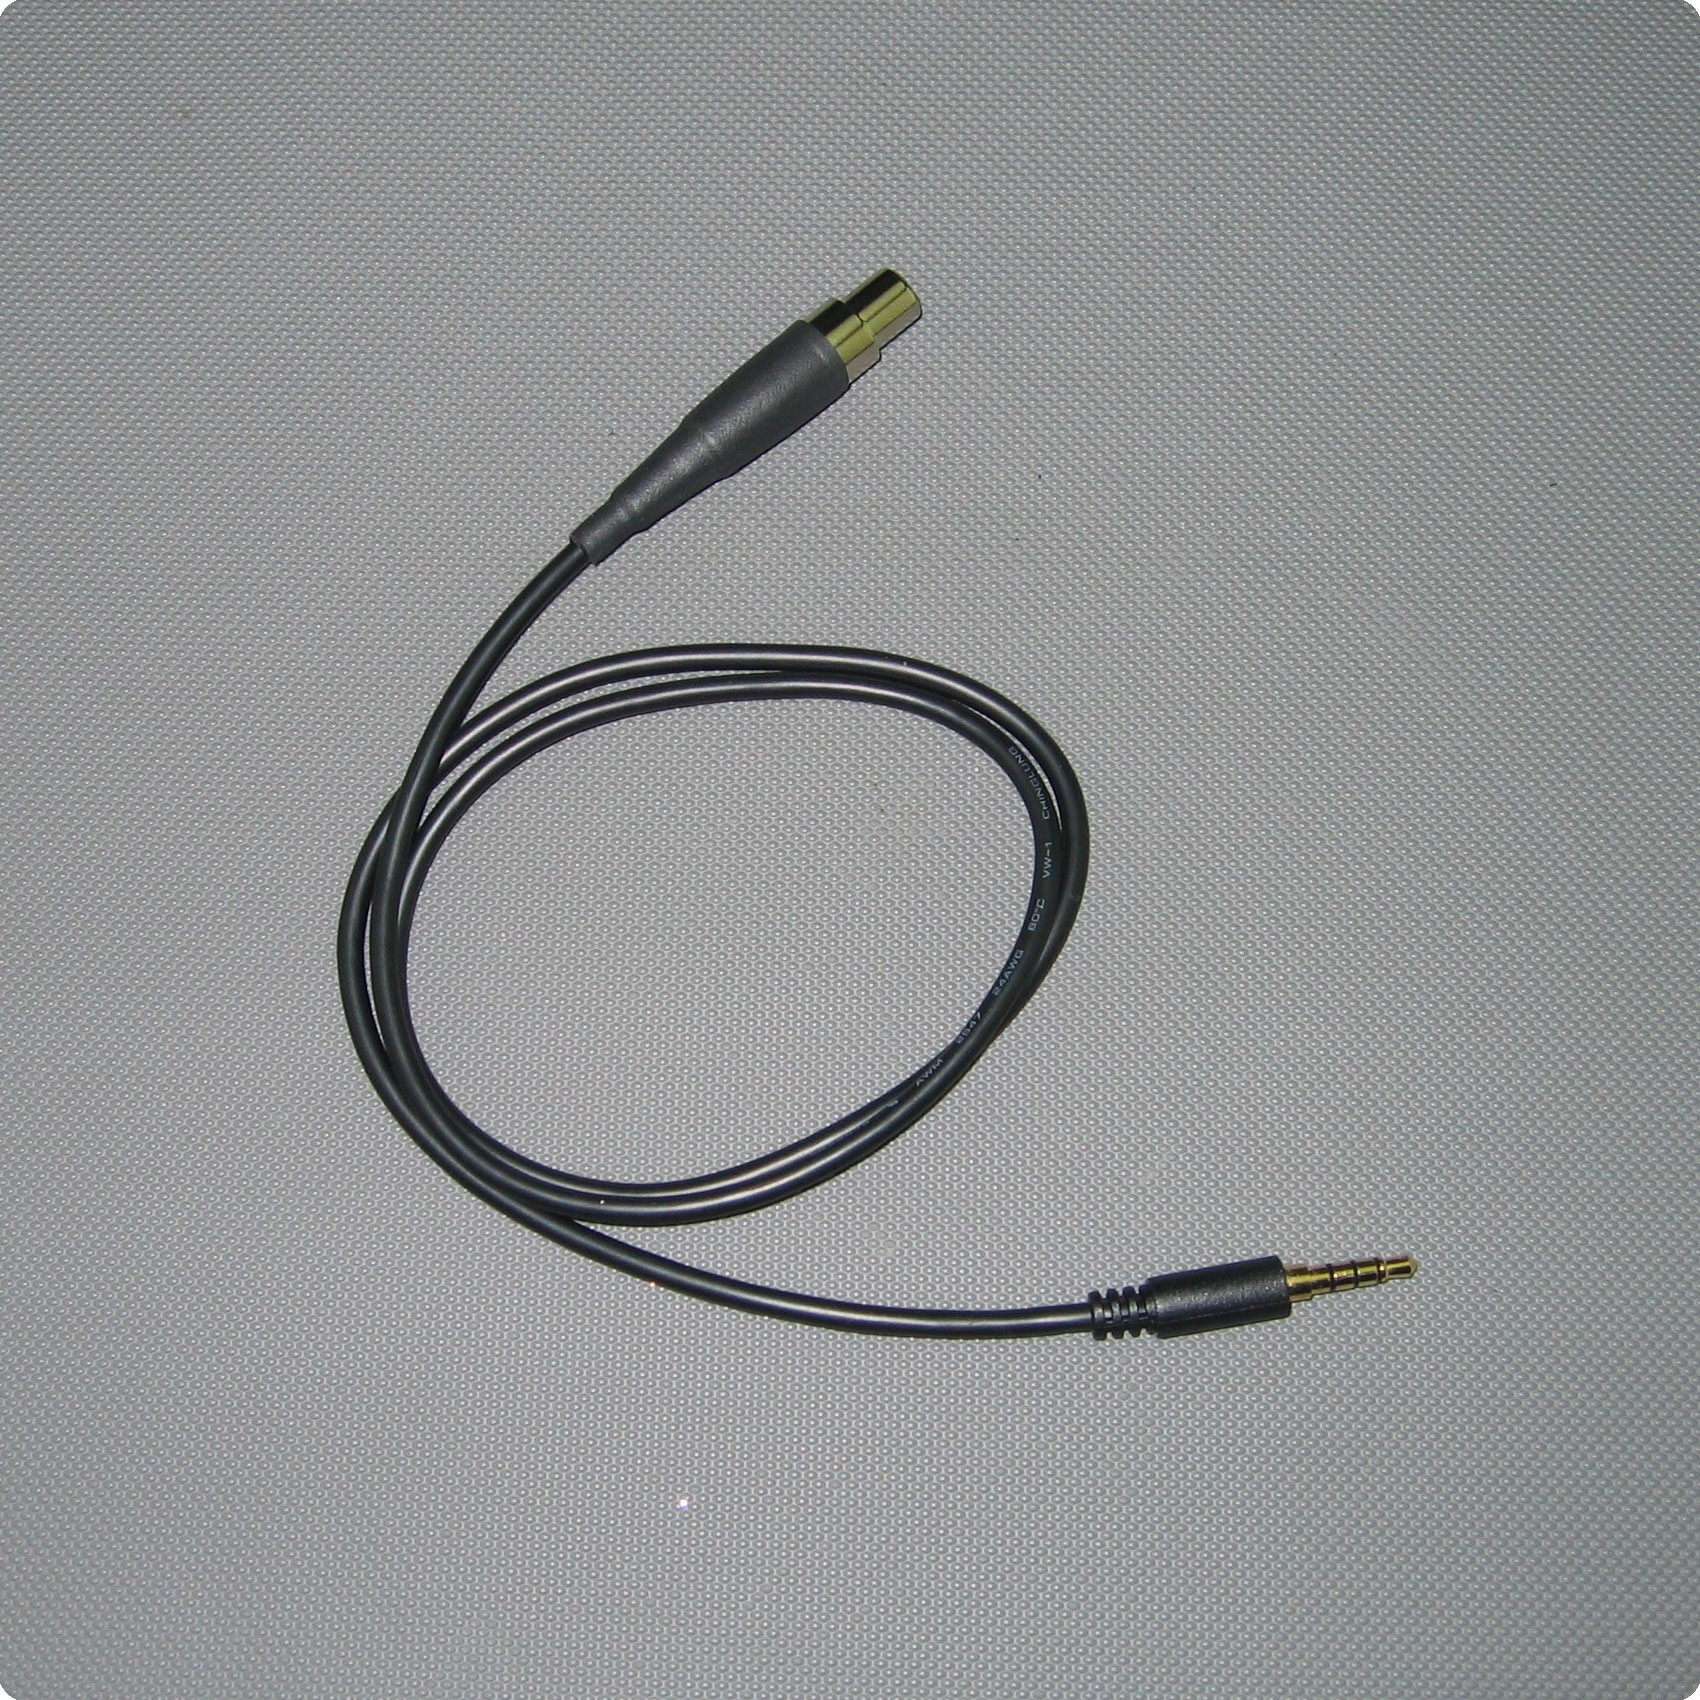 cable FL6CT-4 Iphone o Android auriculares Peltor LiteCom 